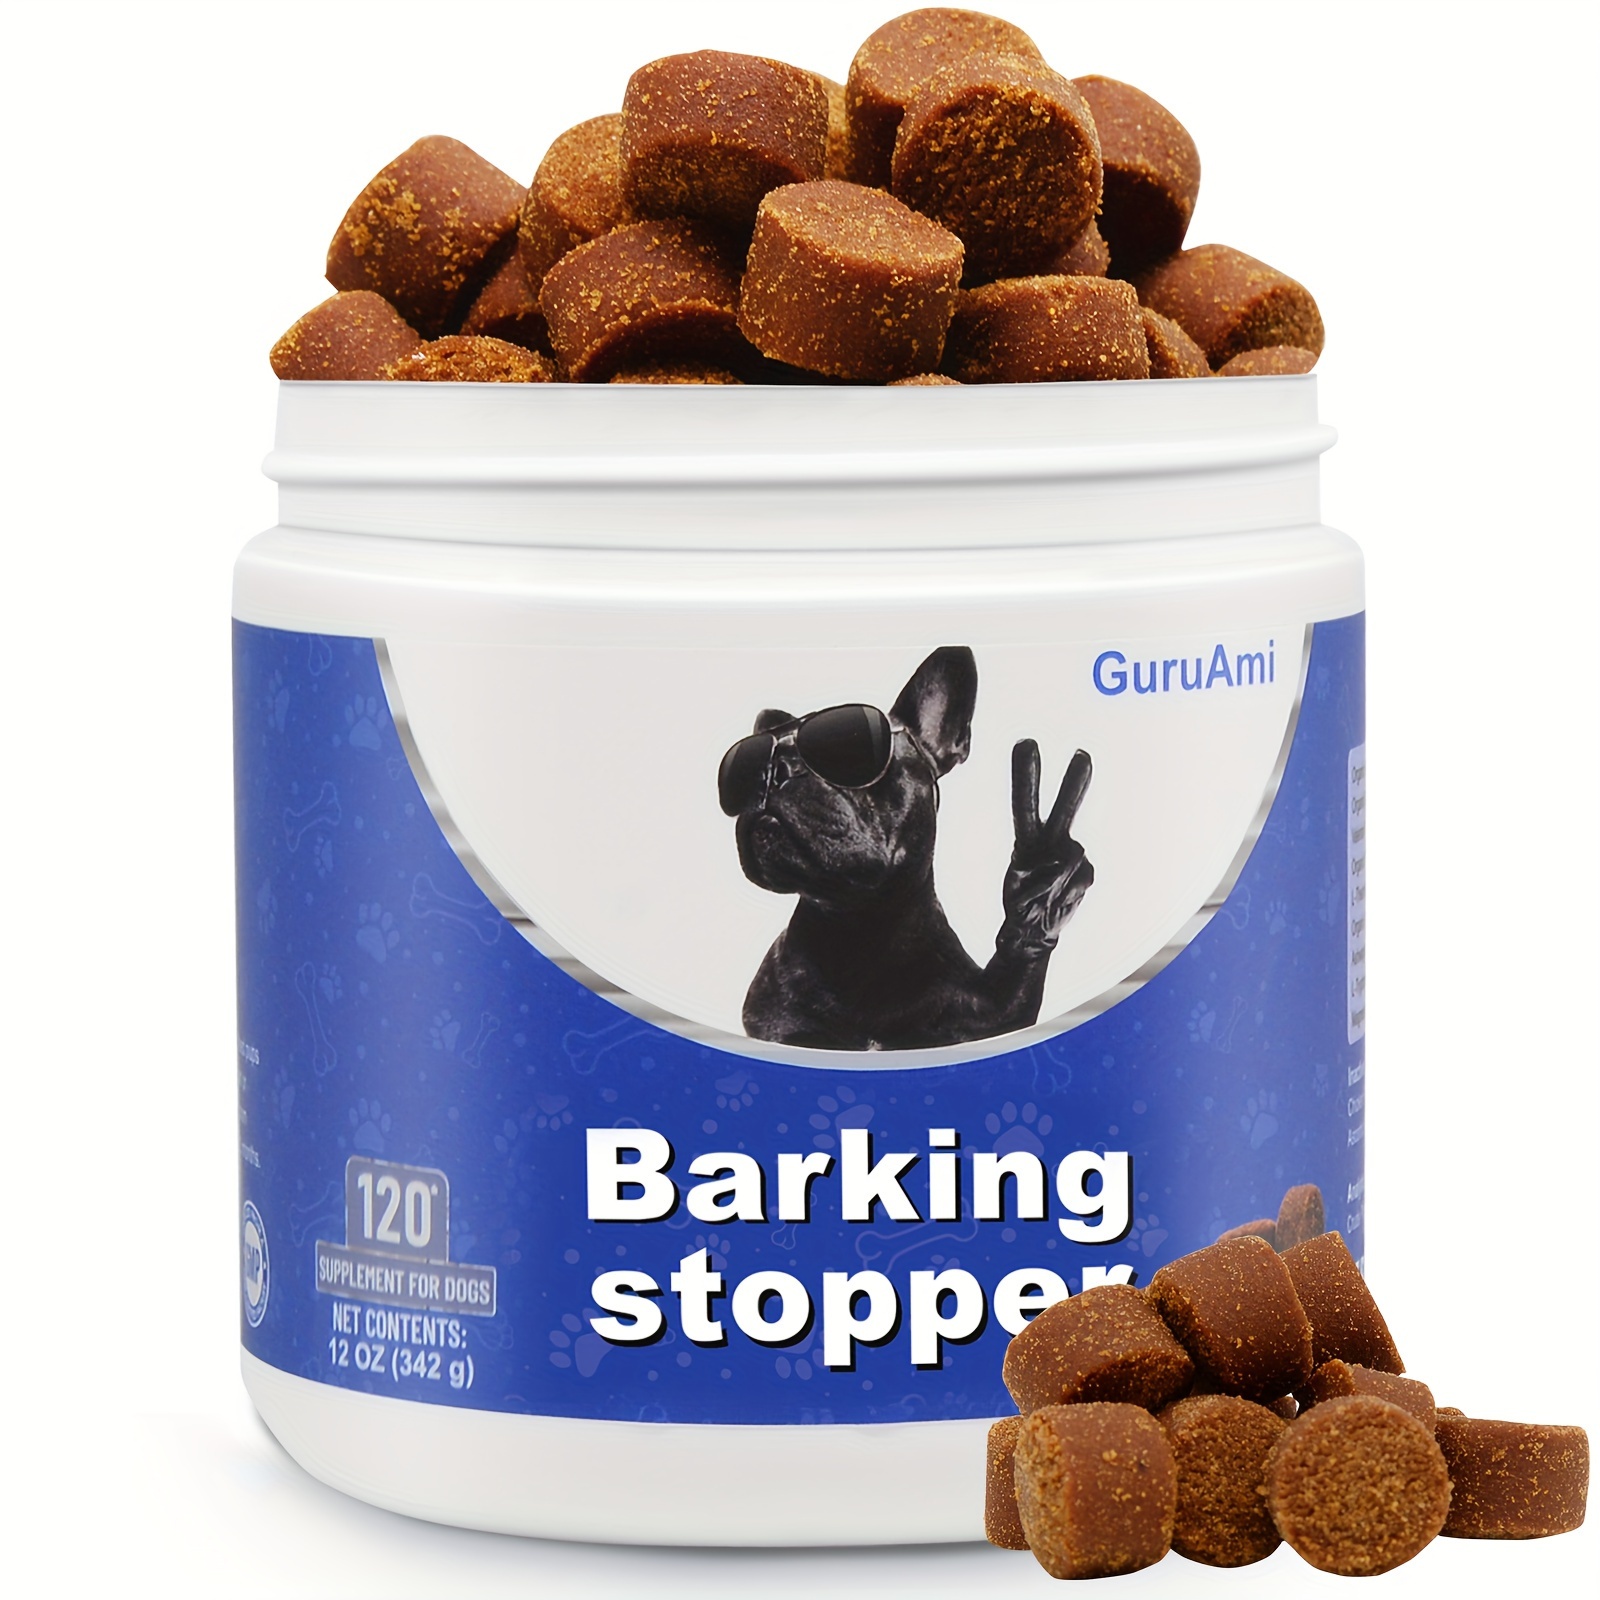 

Barking Stopper Chews For Dog, Supplement For Dog, Helps Alleviate Discomfort In Various Sizes And Breeds Of Dogs During Separation, Training, Travel, Holidays, Thunderstorms, 150chews